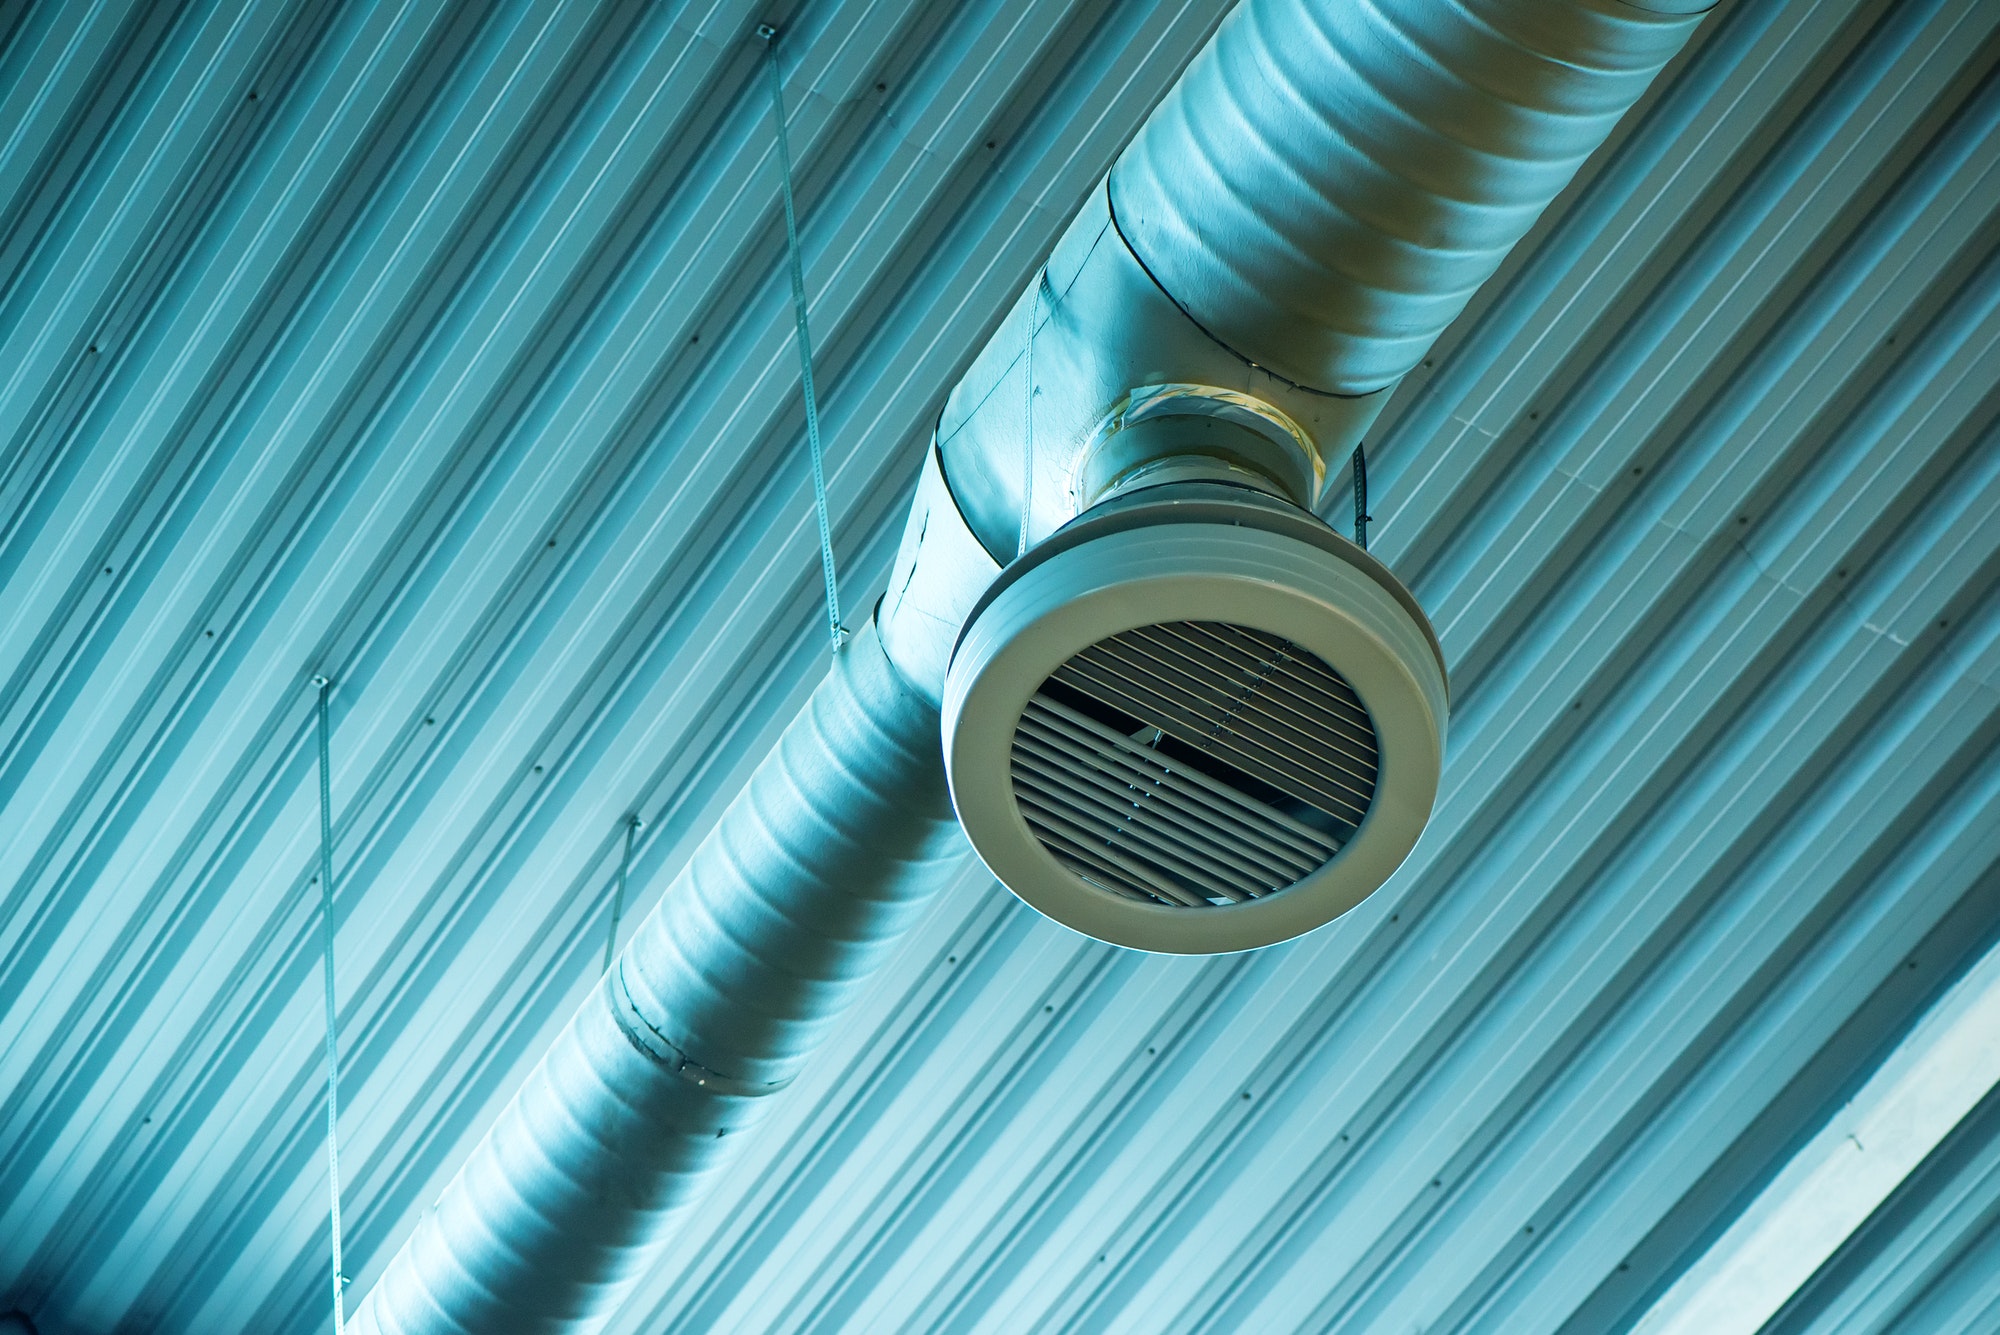 Industrial ventilation system pipes